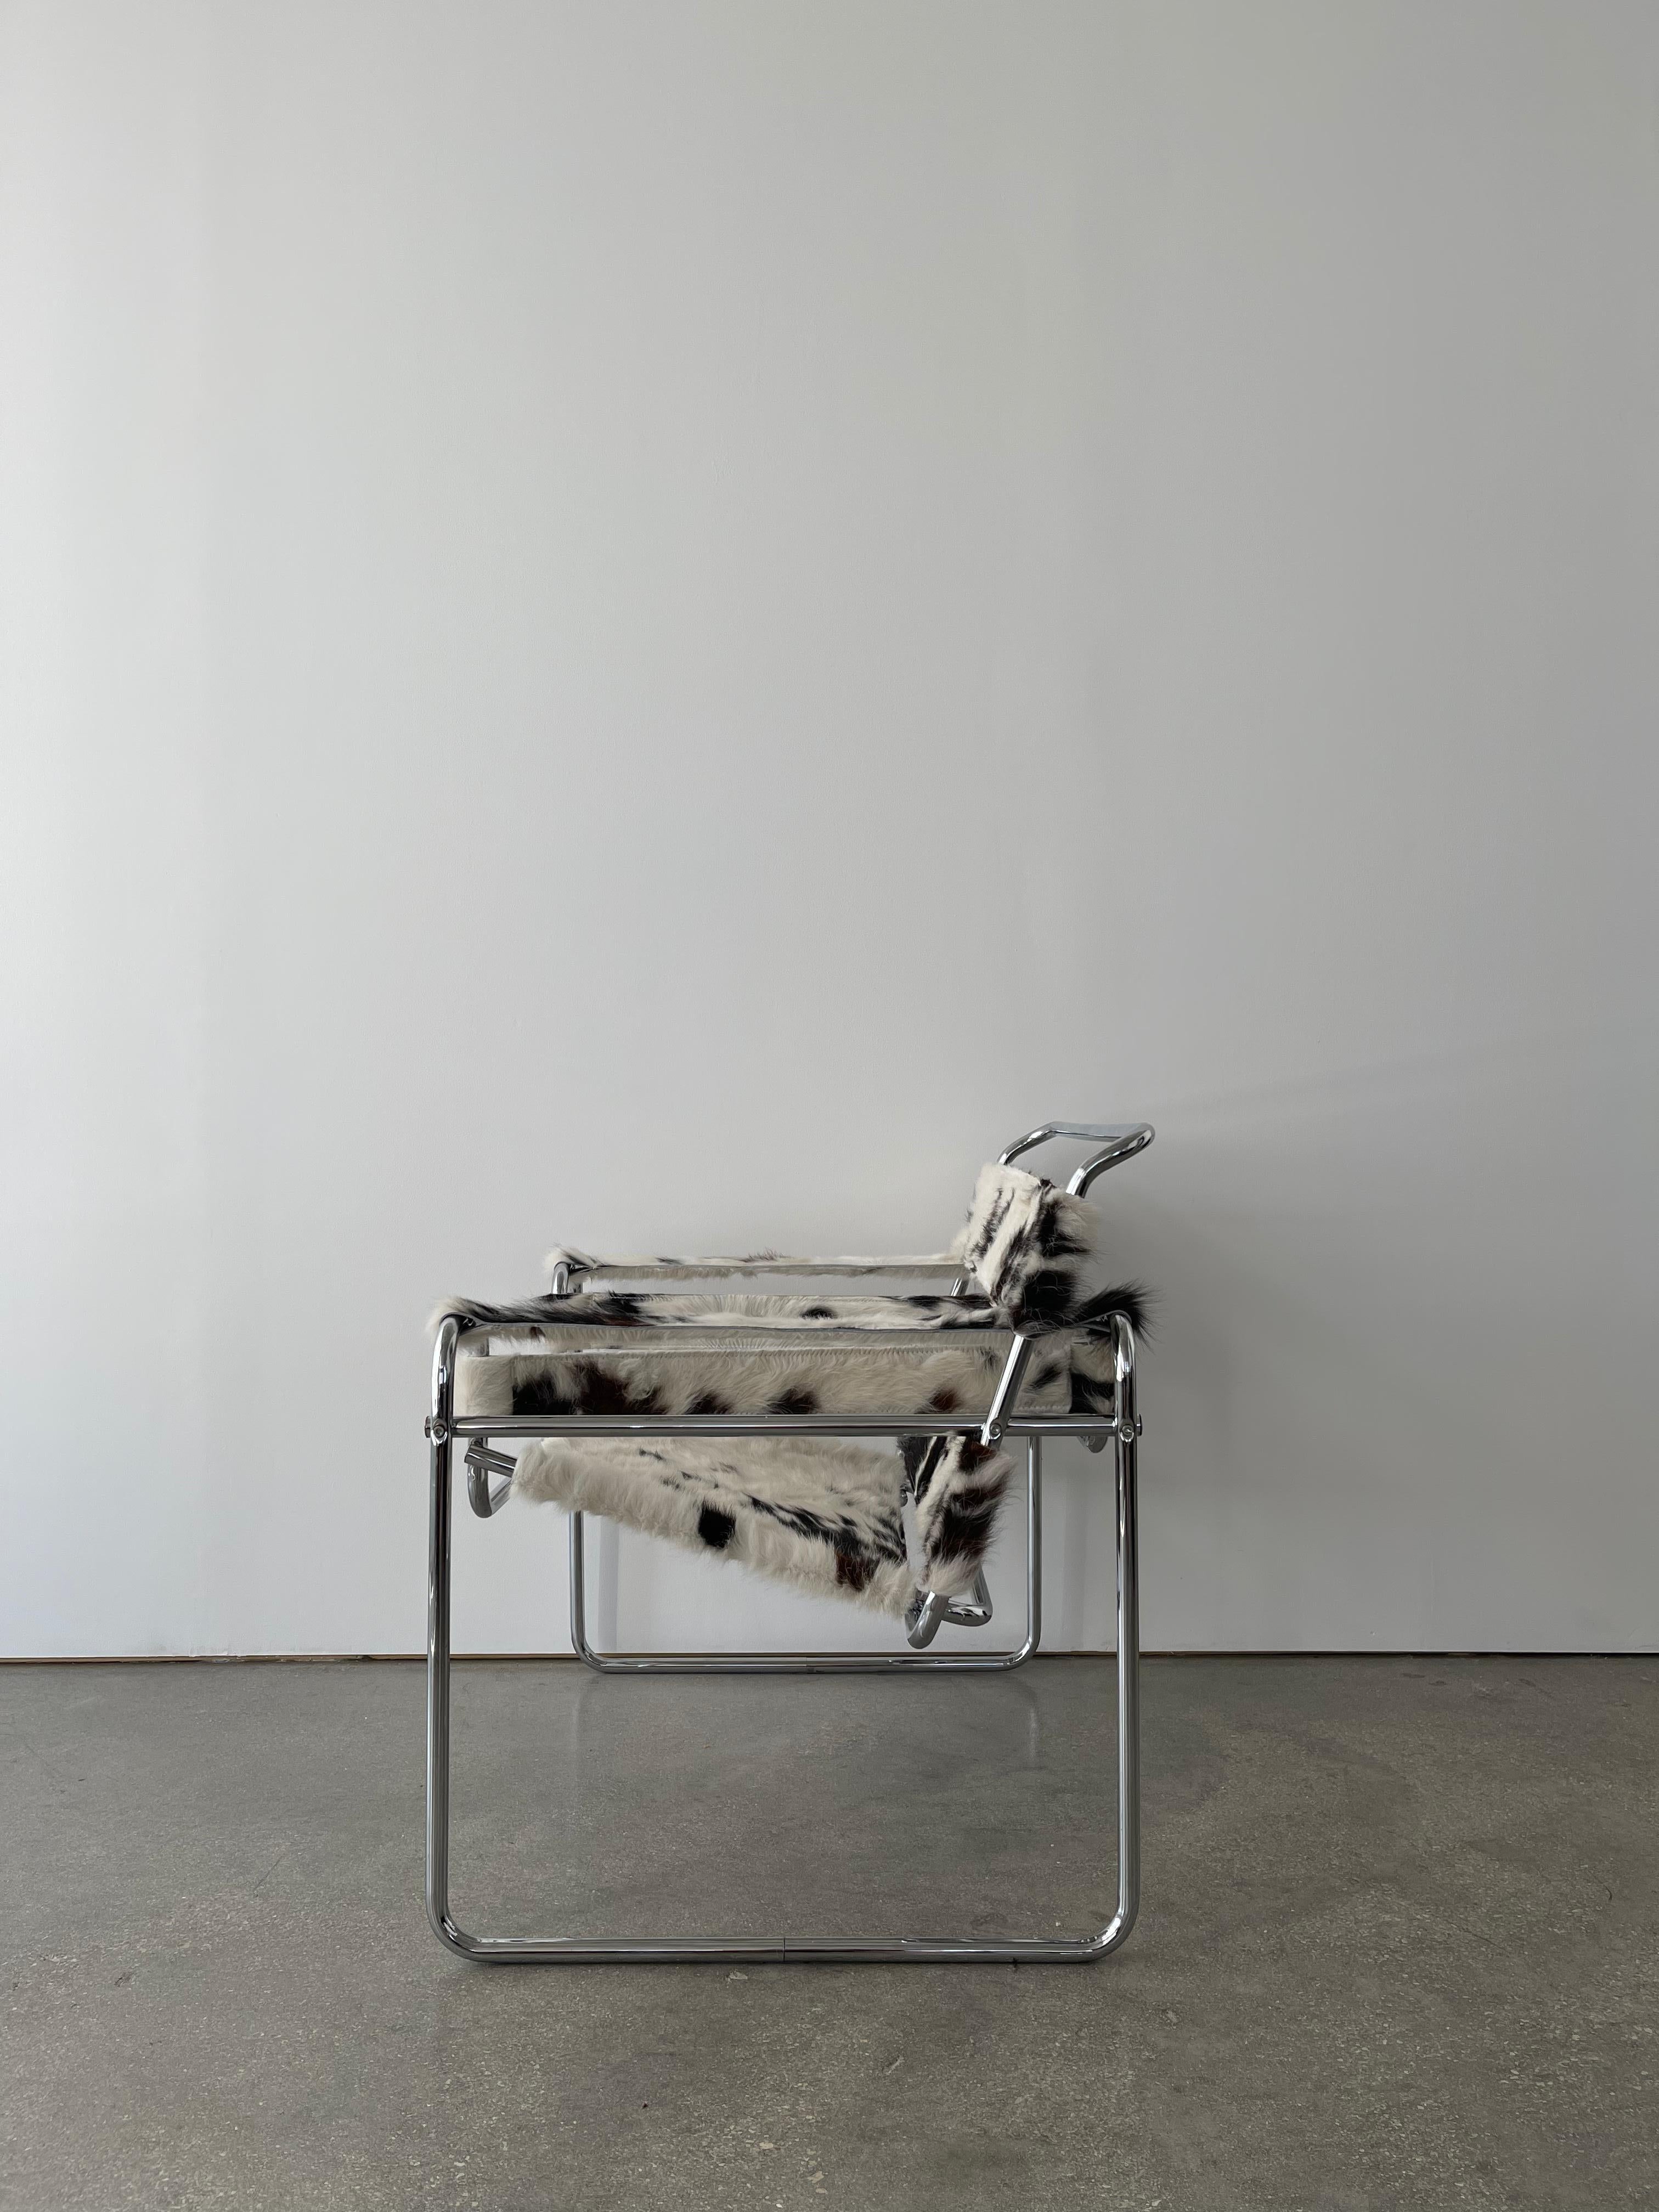 The 1970's Marcel Breuer Wassily 'Style' Armchair was reimagined in thick hairy Texas cowhide. 
The chair is great vintage condition with minimal wear to the chrome frame. The frame is sturdy and strong with thick, tight straps yet light and sleek.